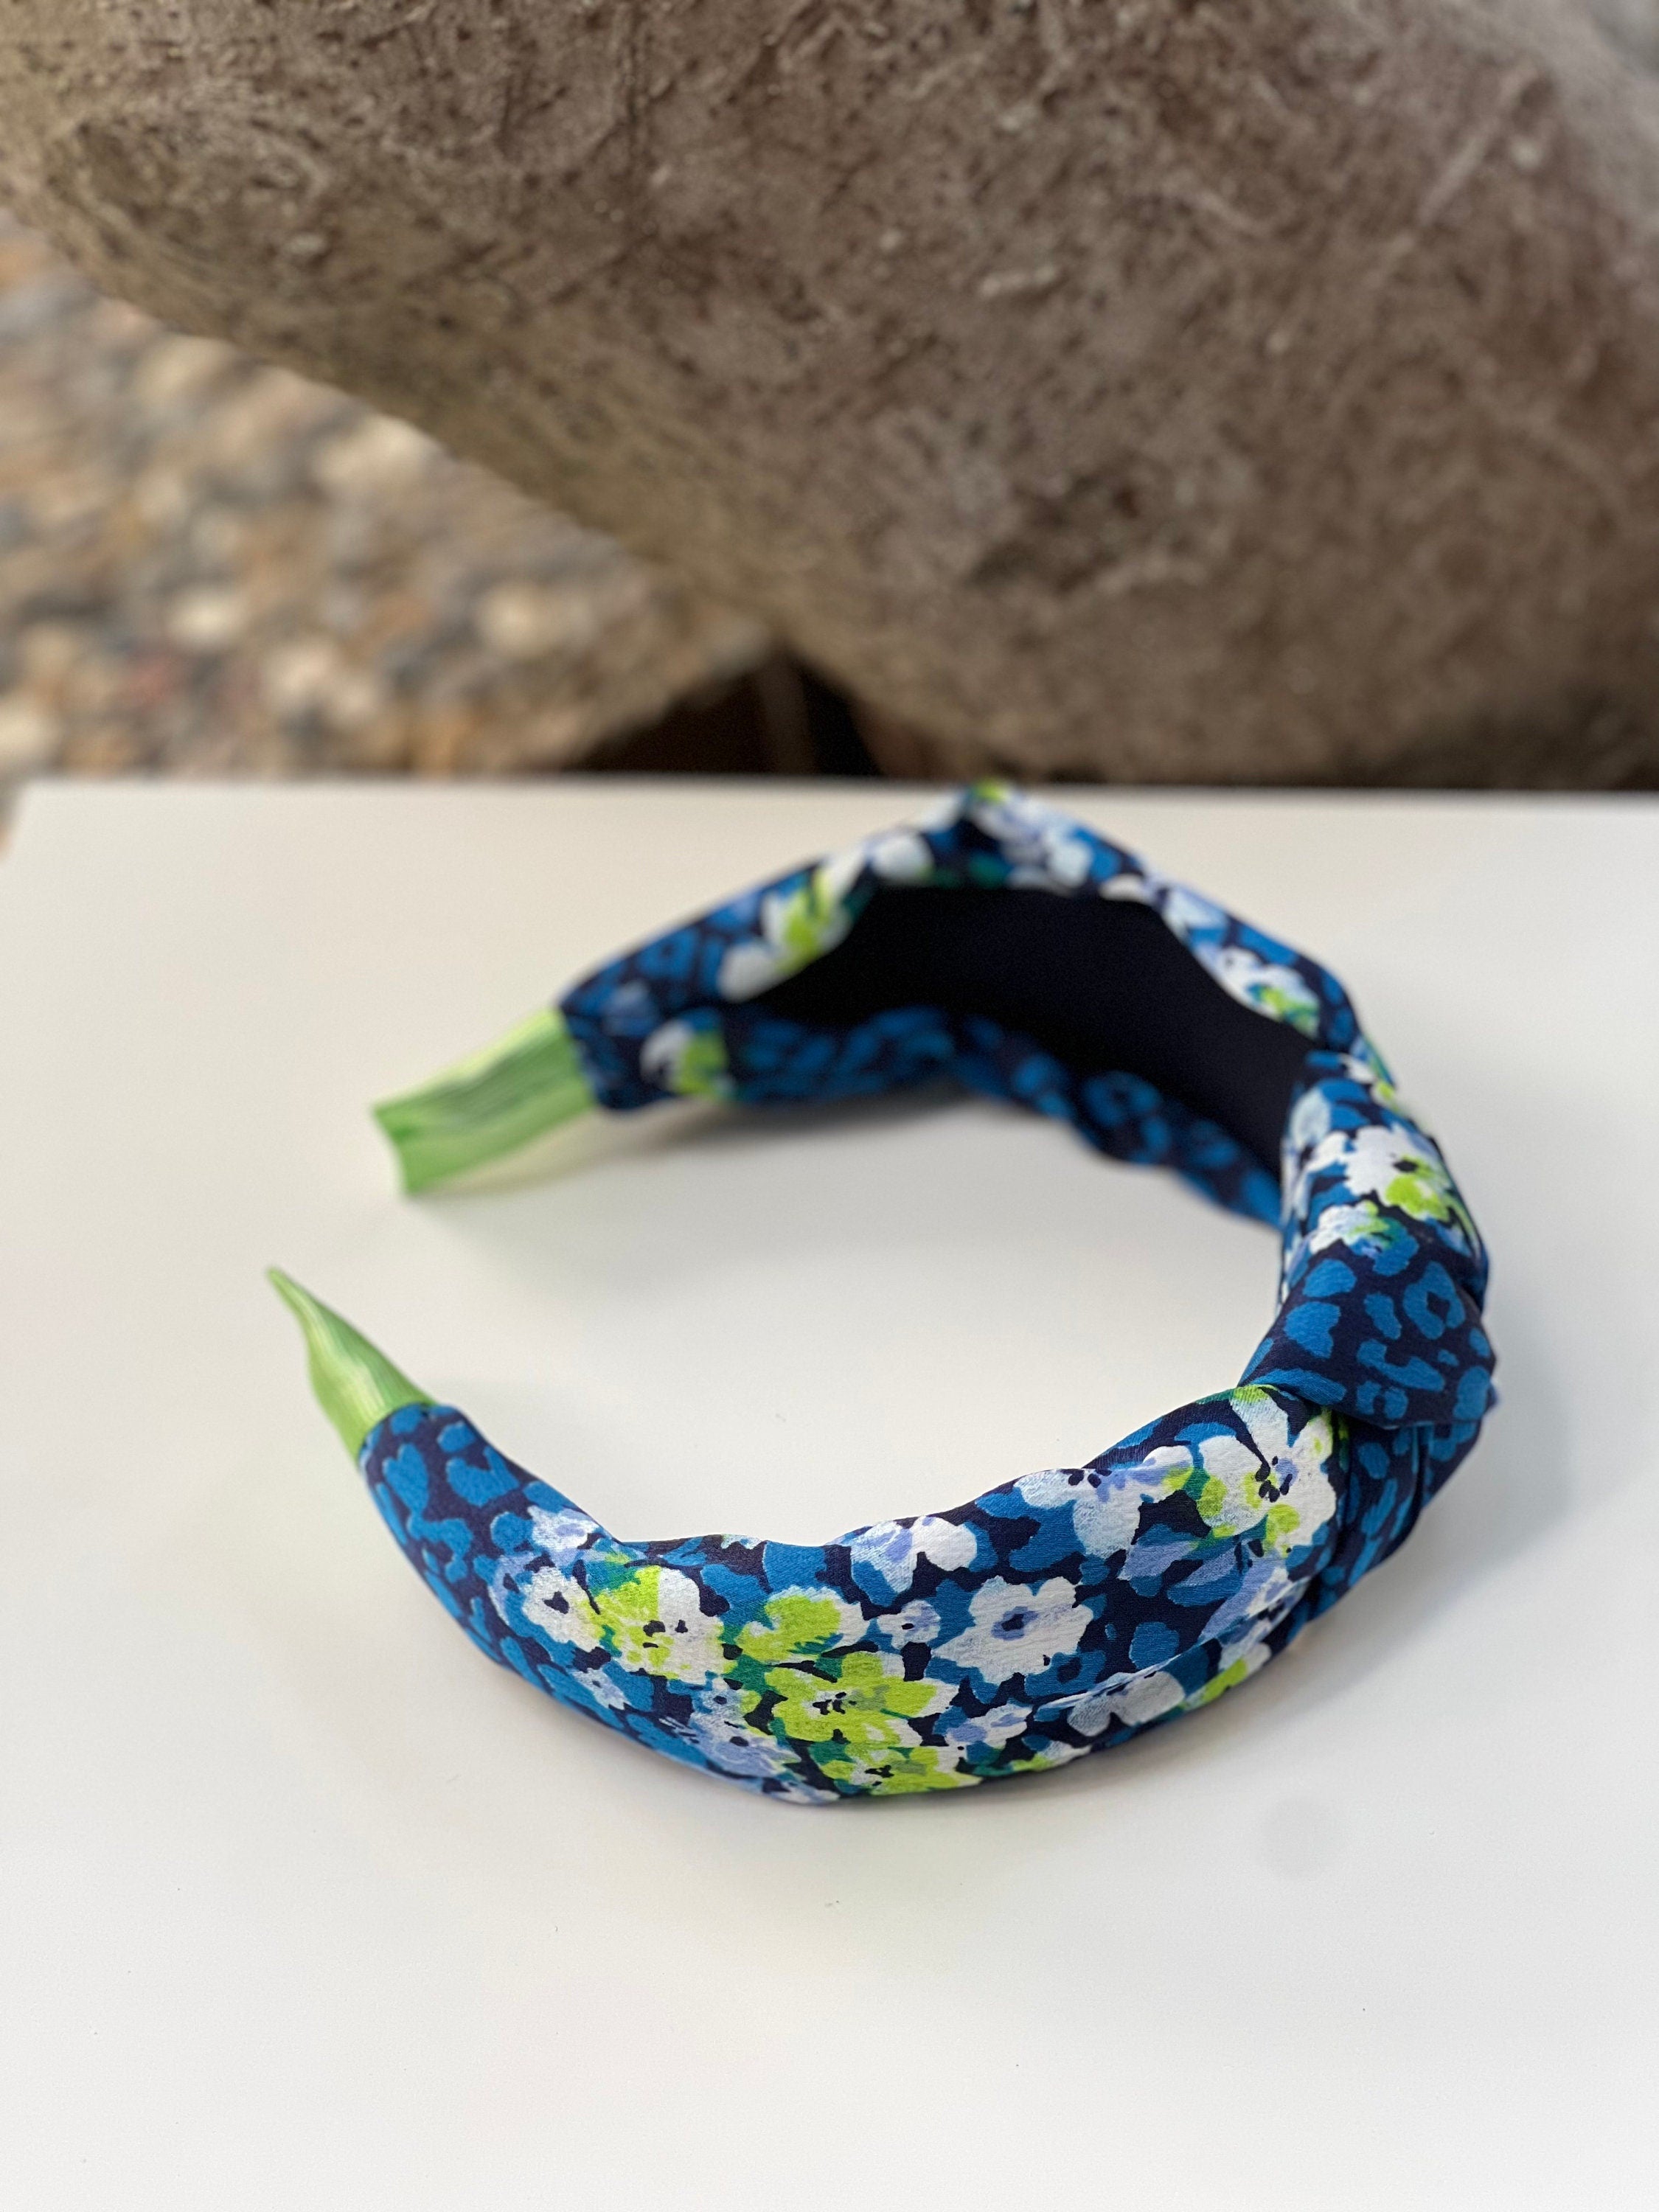 A Colorful Hairband featuring a variety of vibrant hues that make a statement.